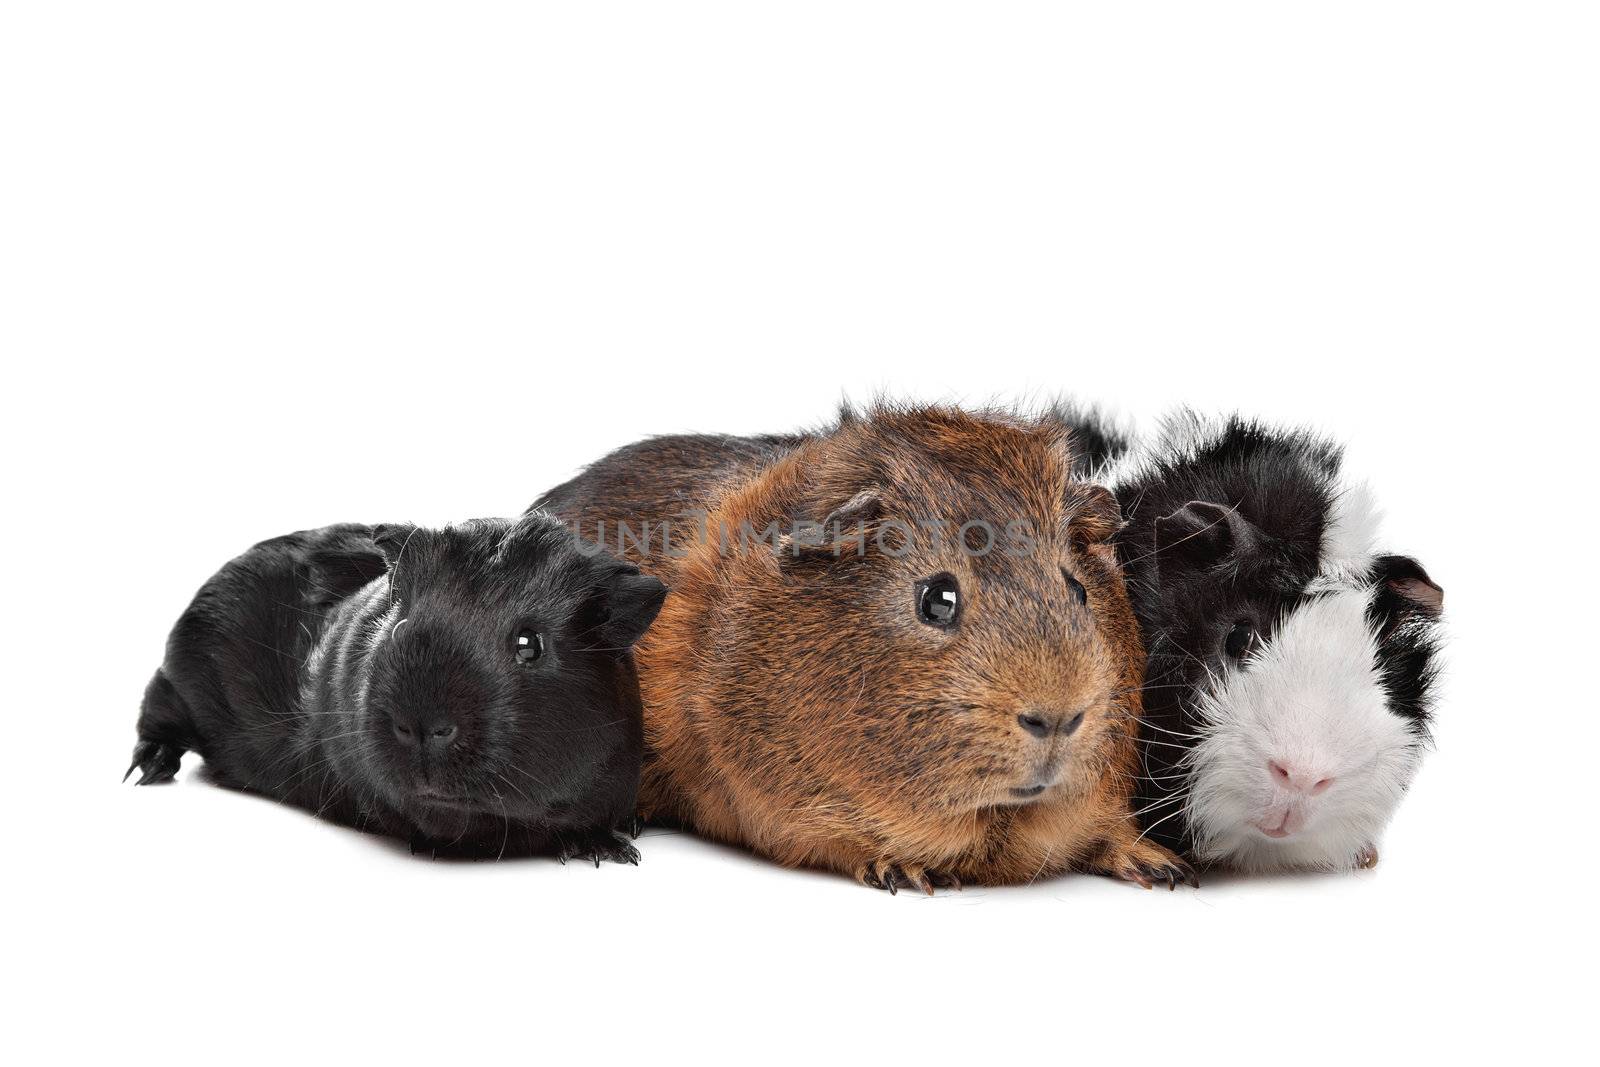 three Guinea pigs in front of a white background